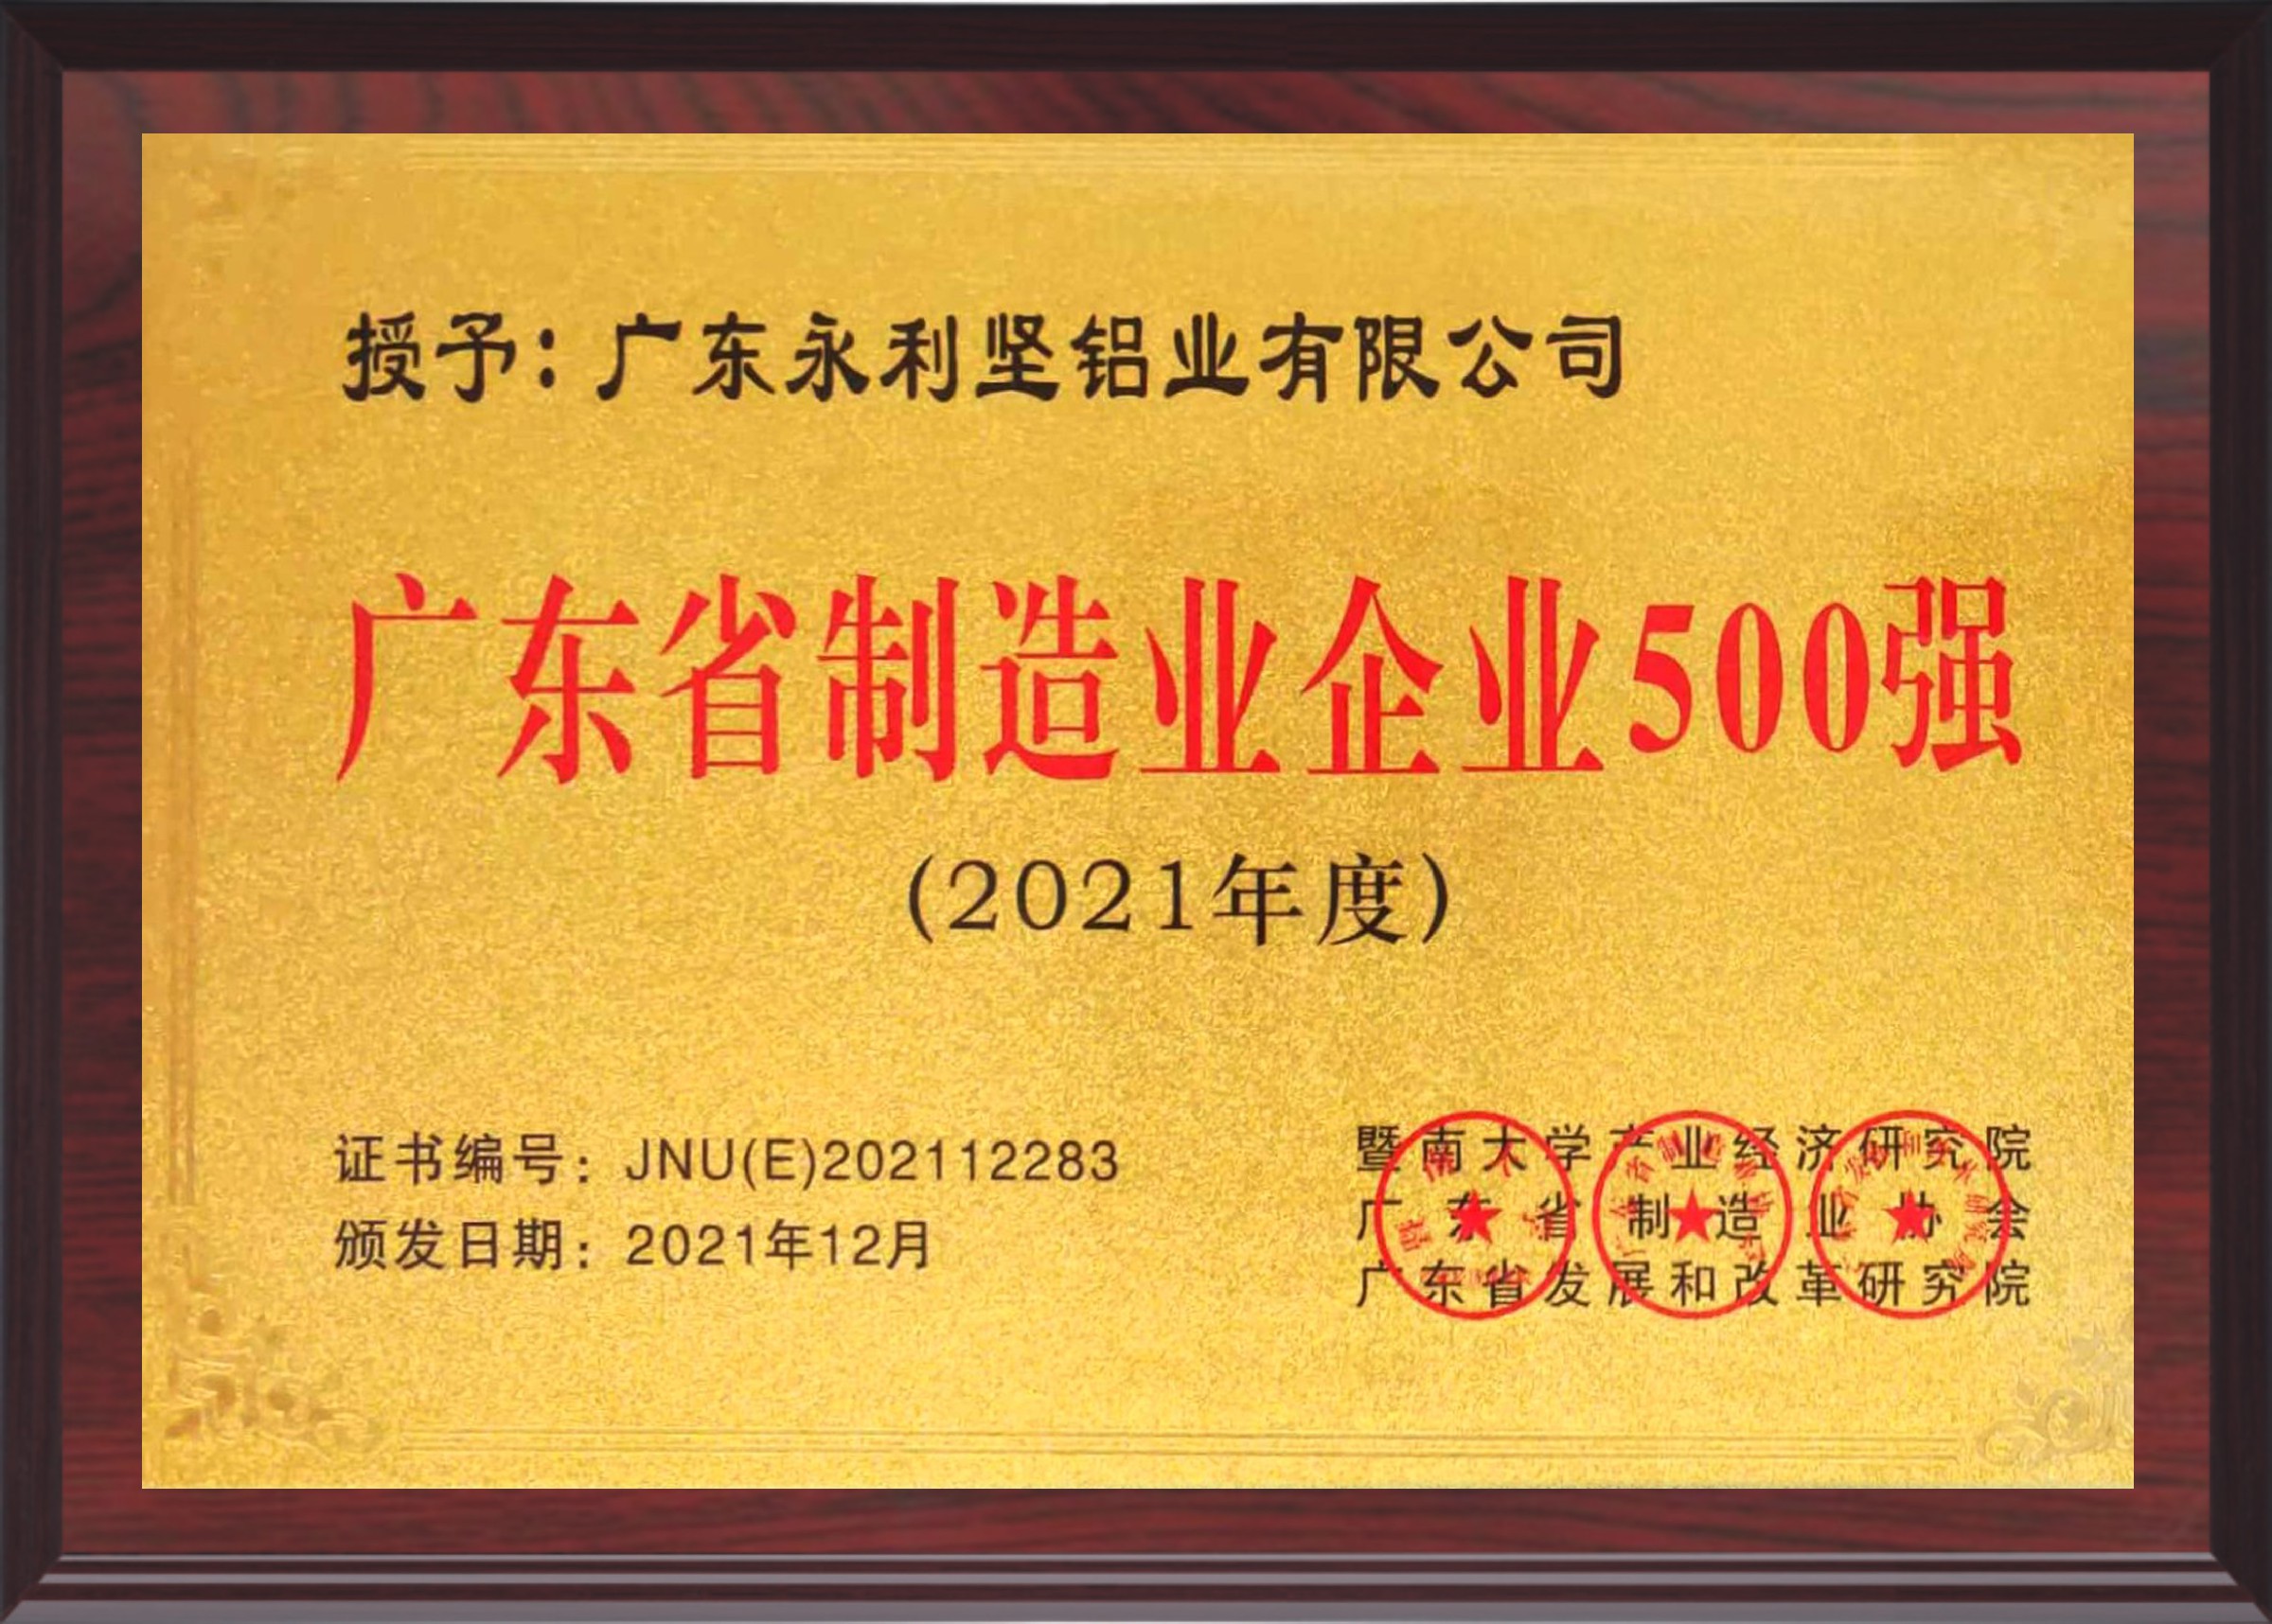 Top 500 manufacturing enterprises in Guangdong Province